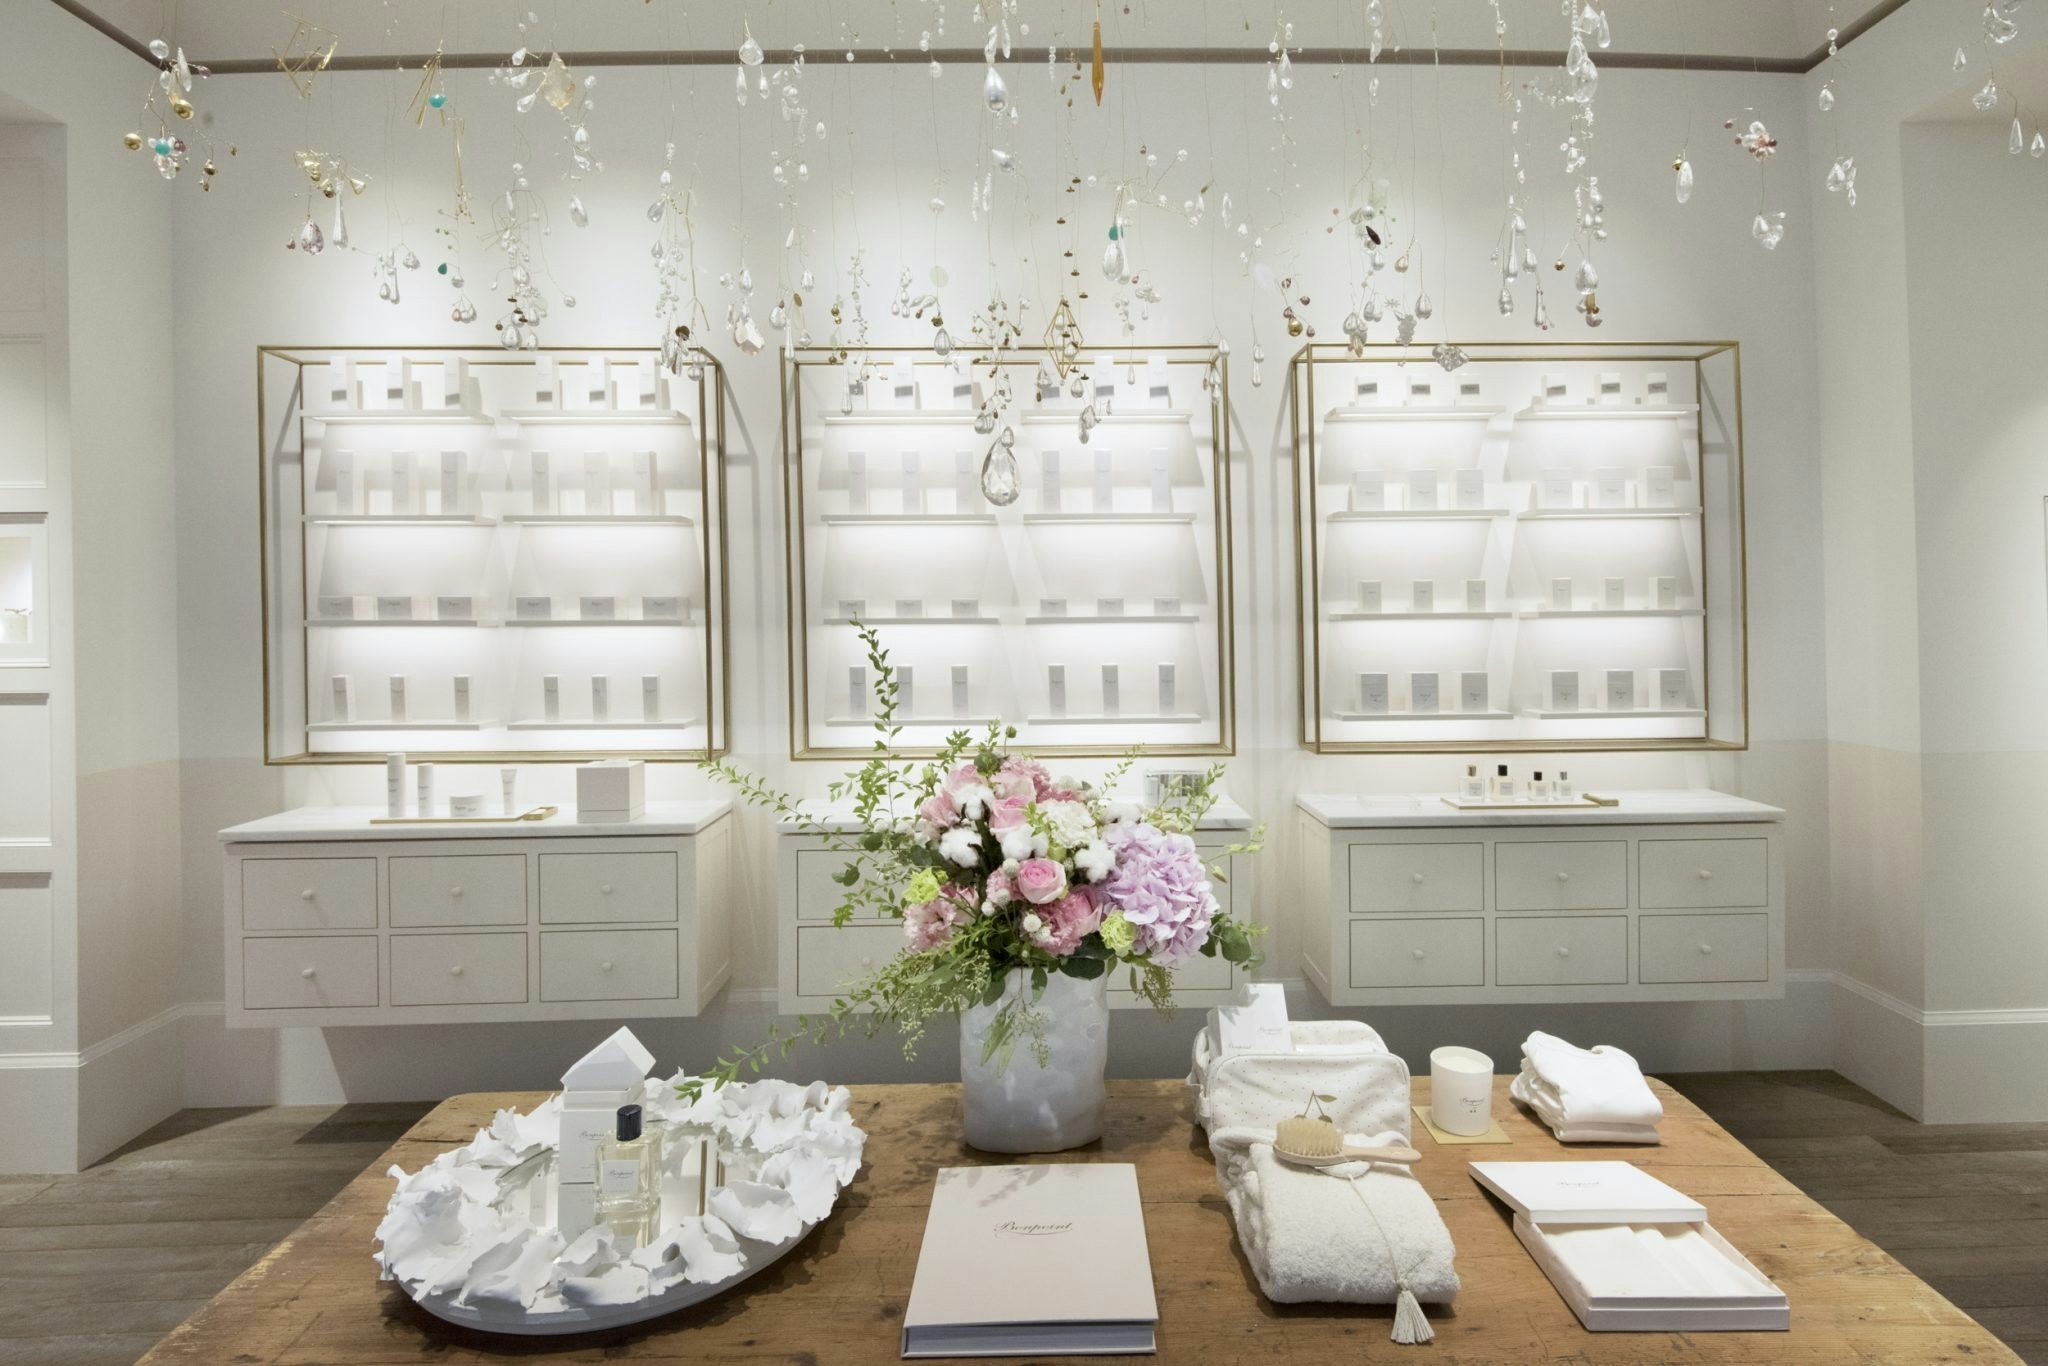 Bonpoint's perfume and cosmetic conceptual store opened on September 2017 in Taikoo Hui, Shanghai. Photo: Courtesy Bonpoint